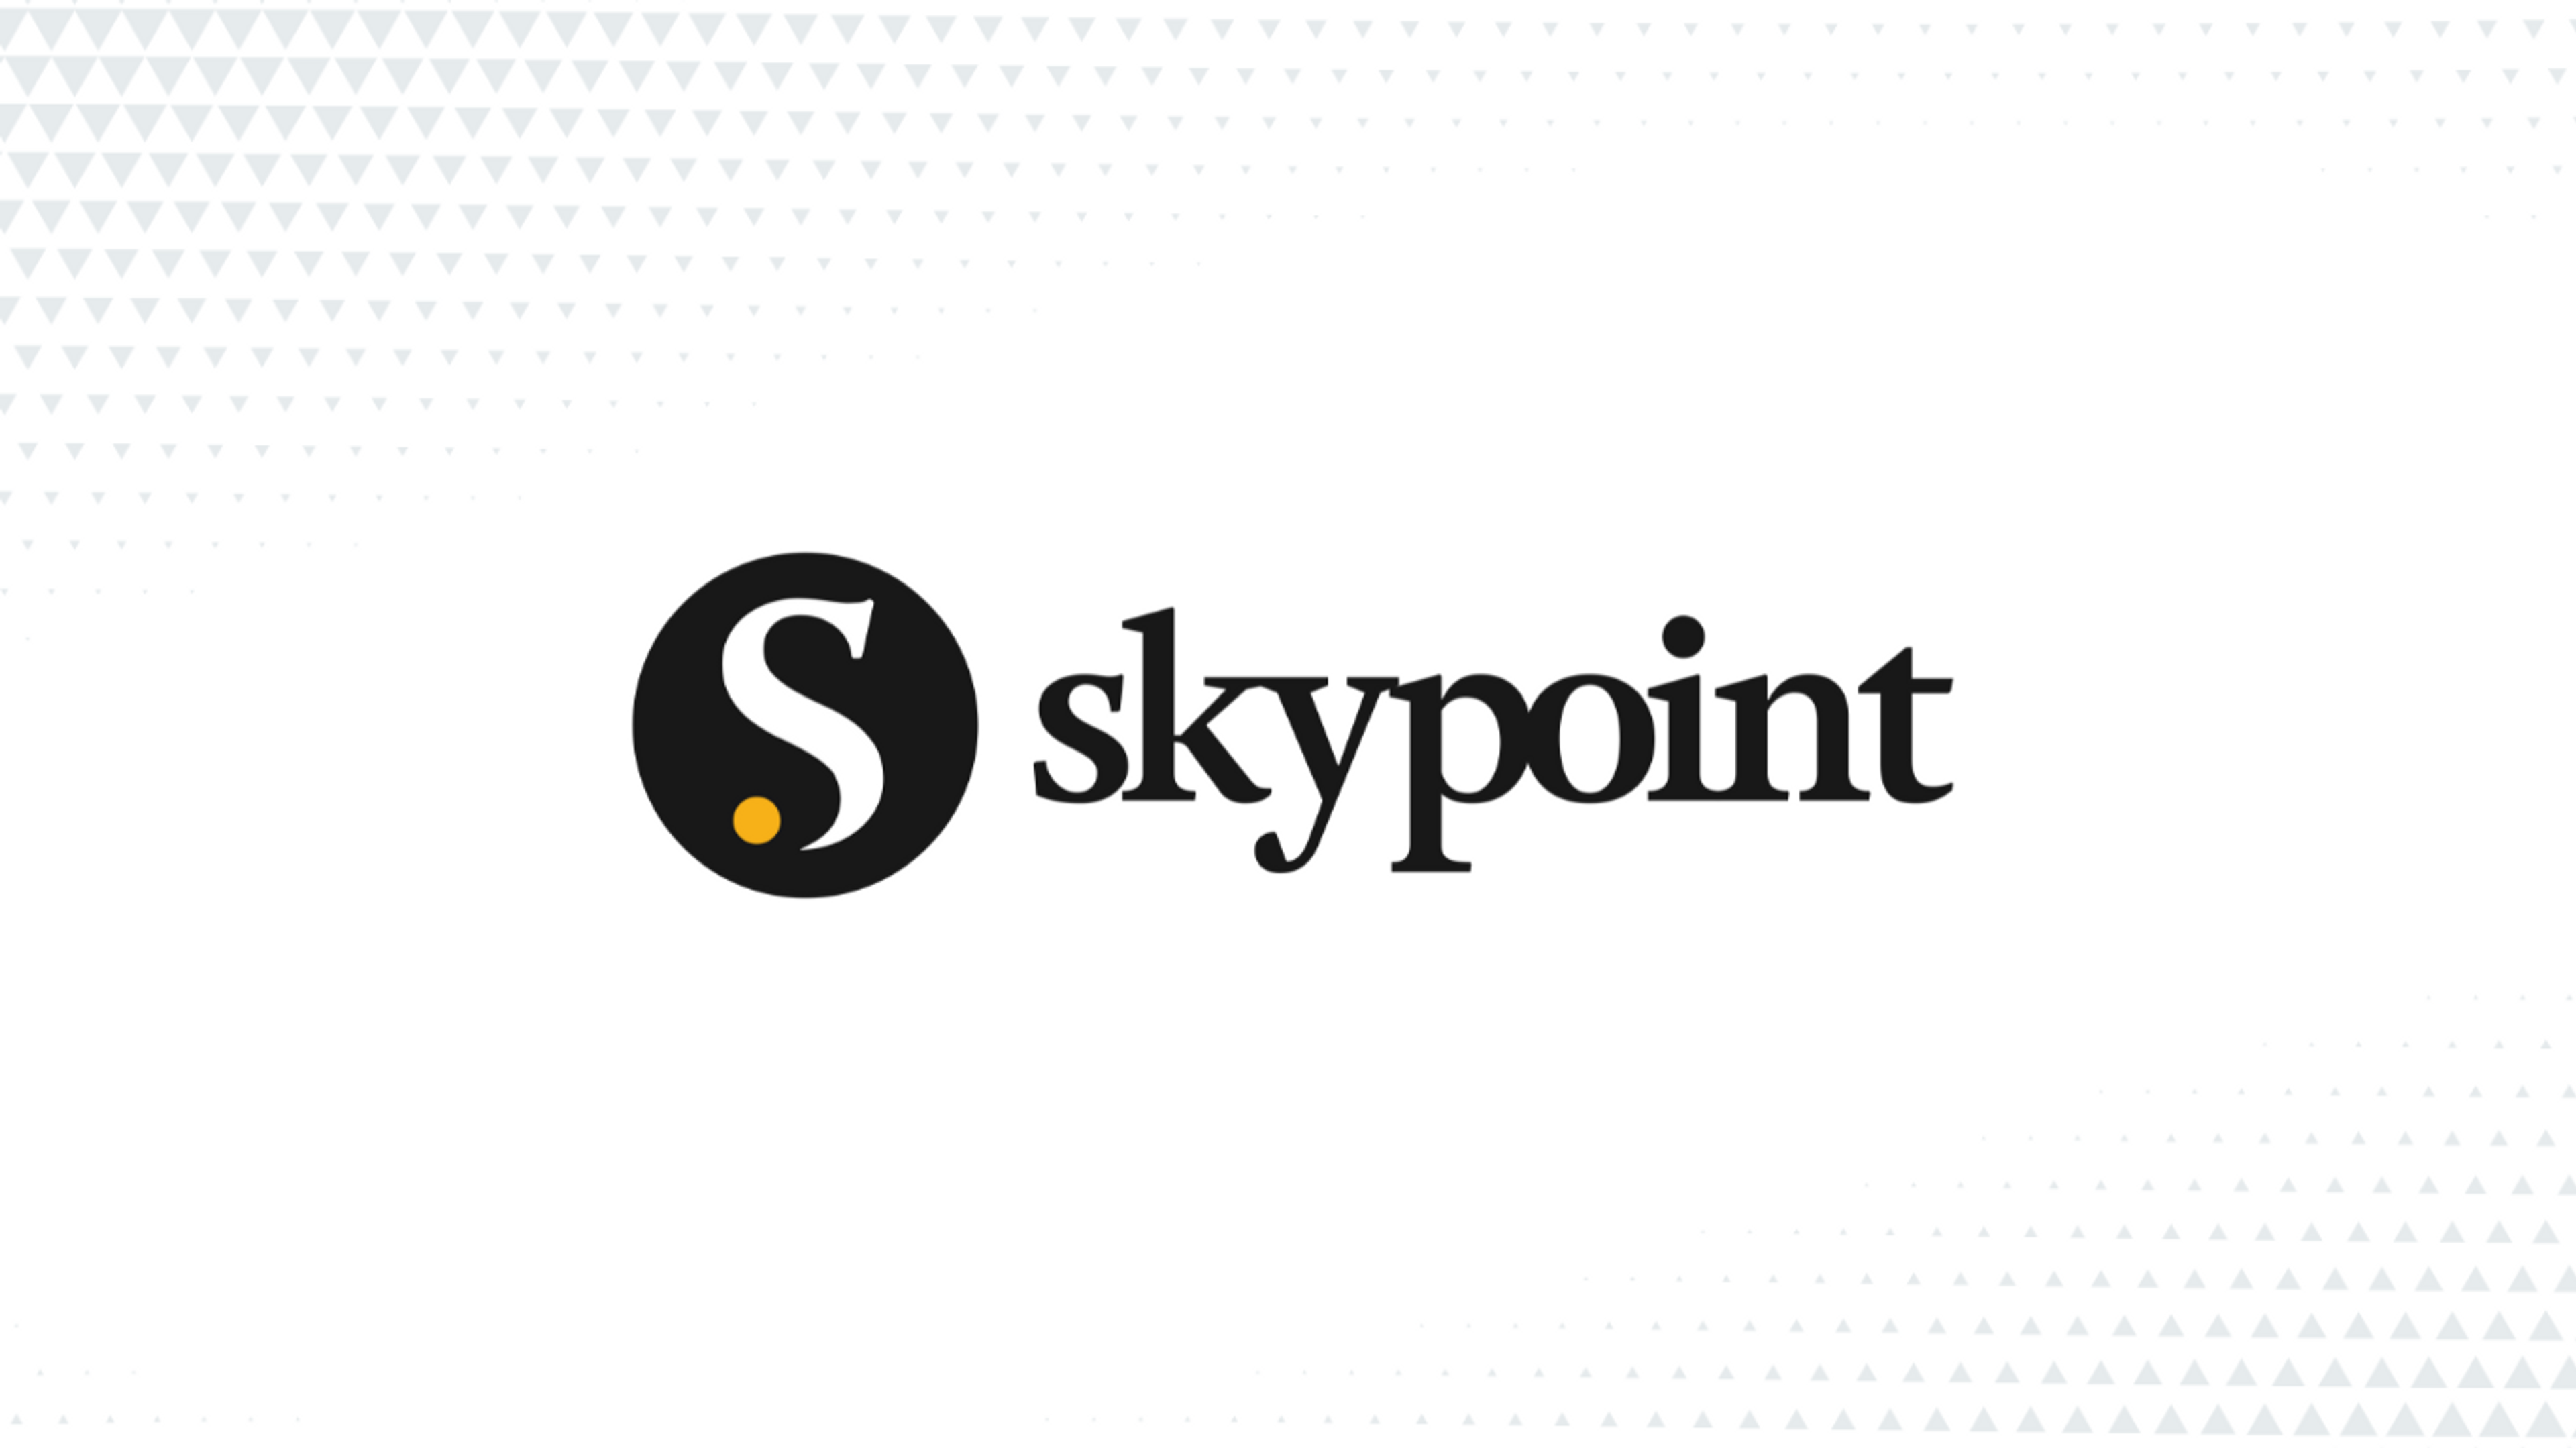 SkyPoint: How to Train Your LLM Dragon